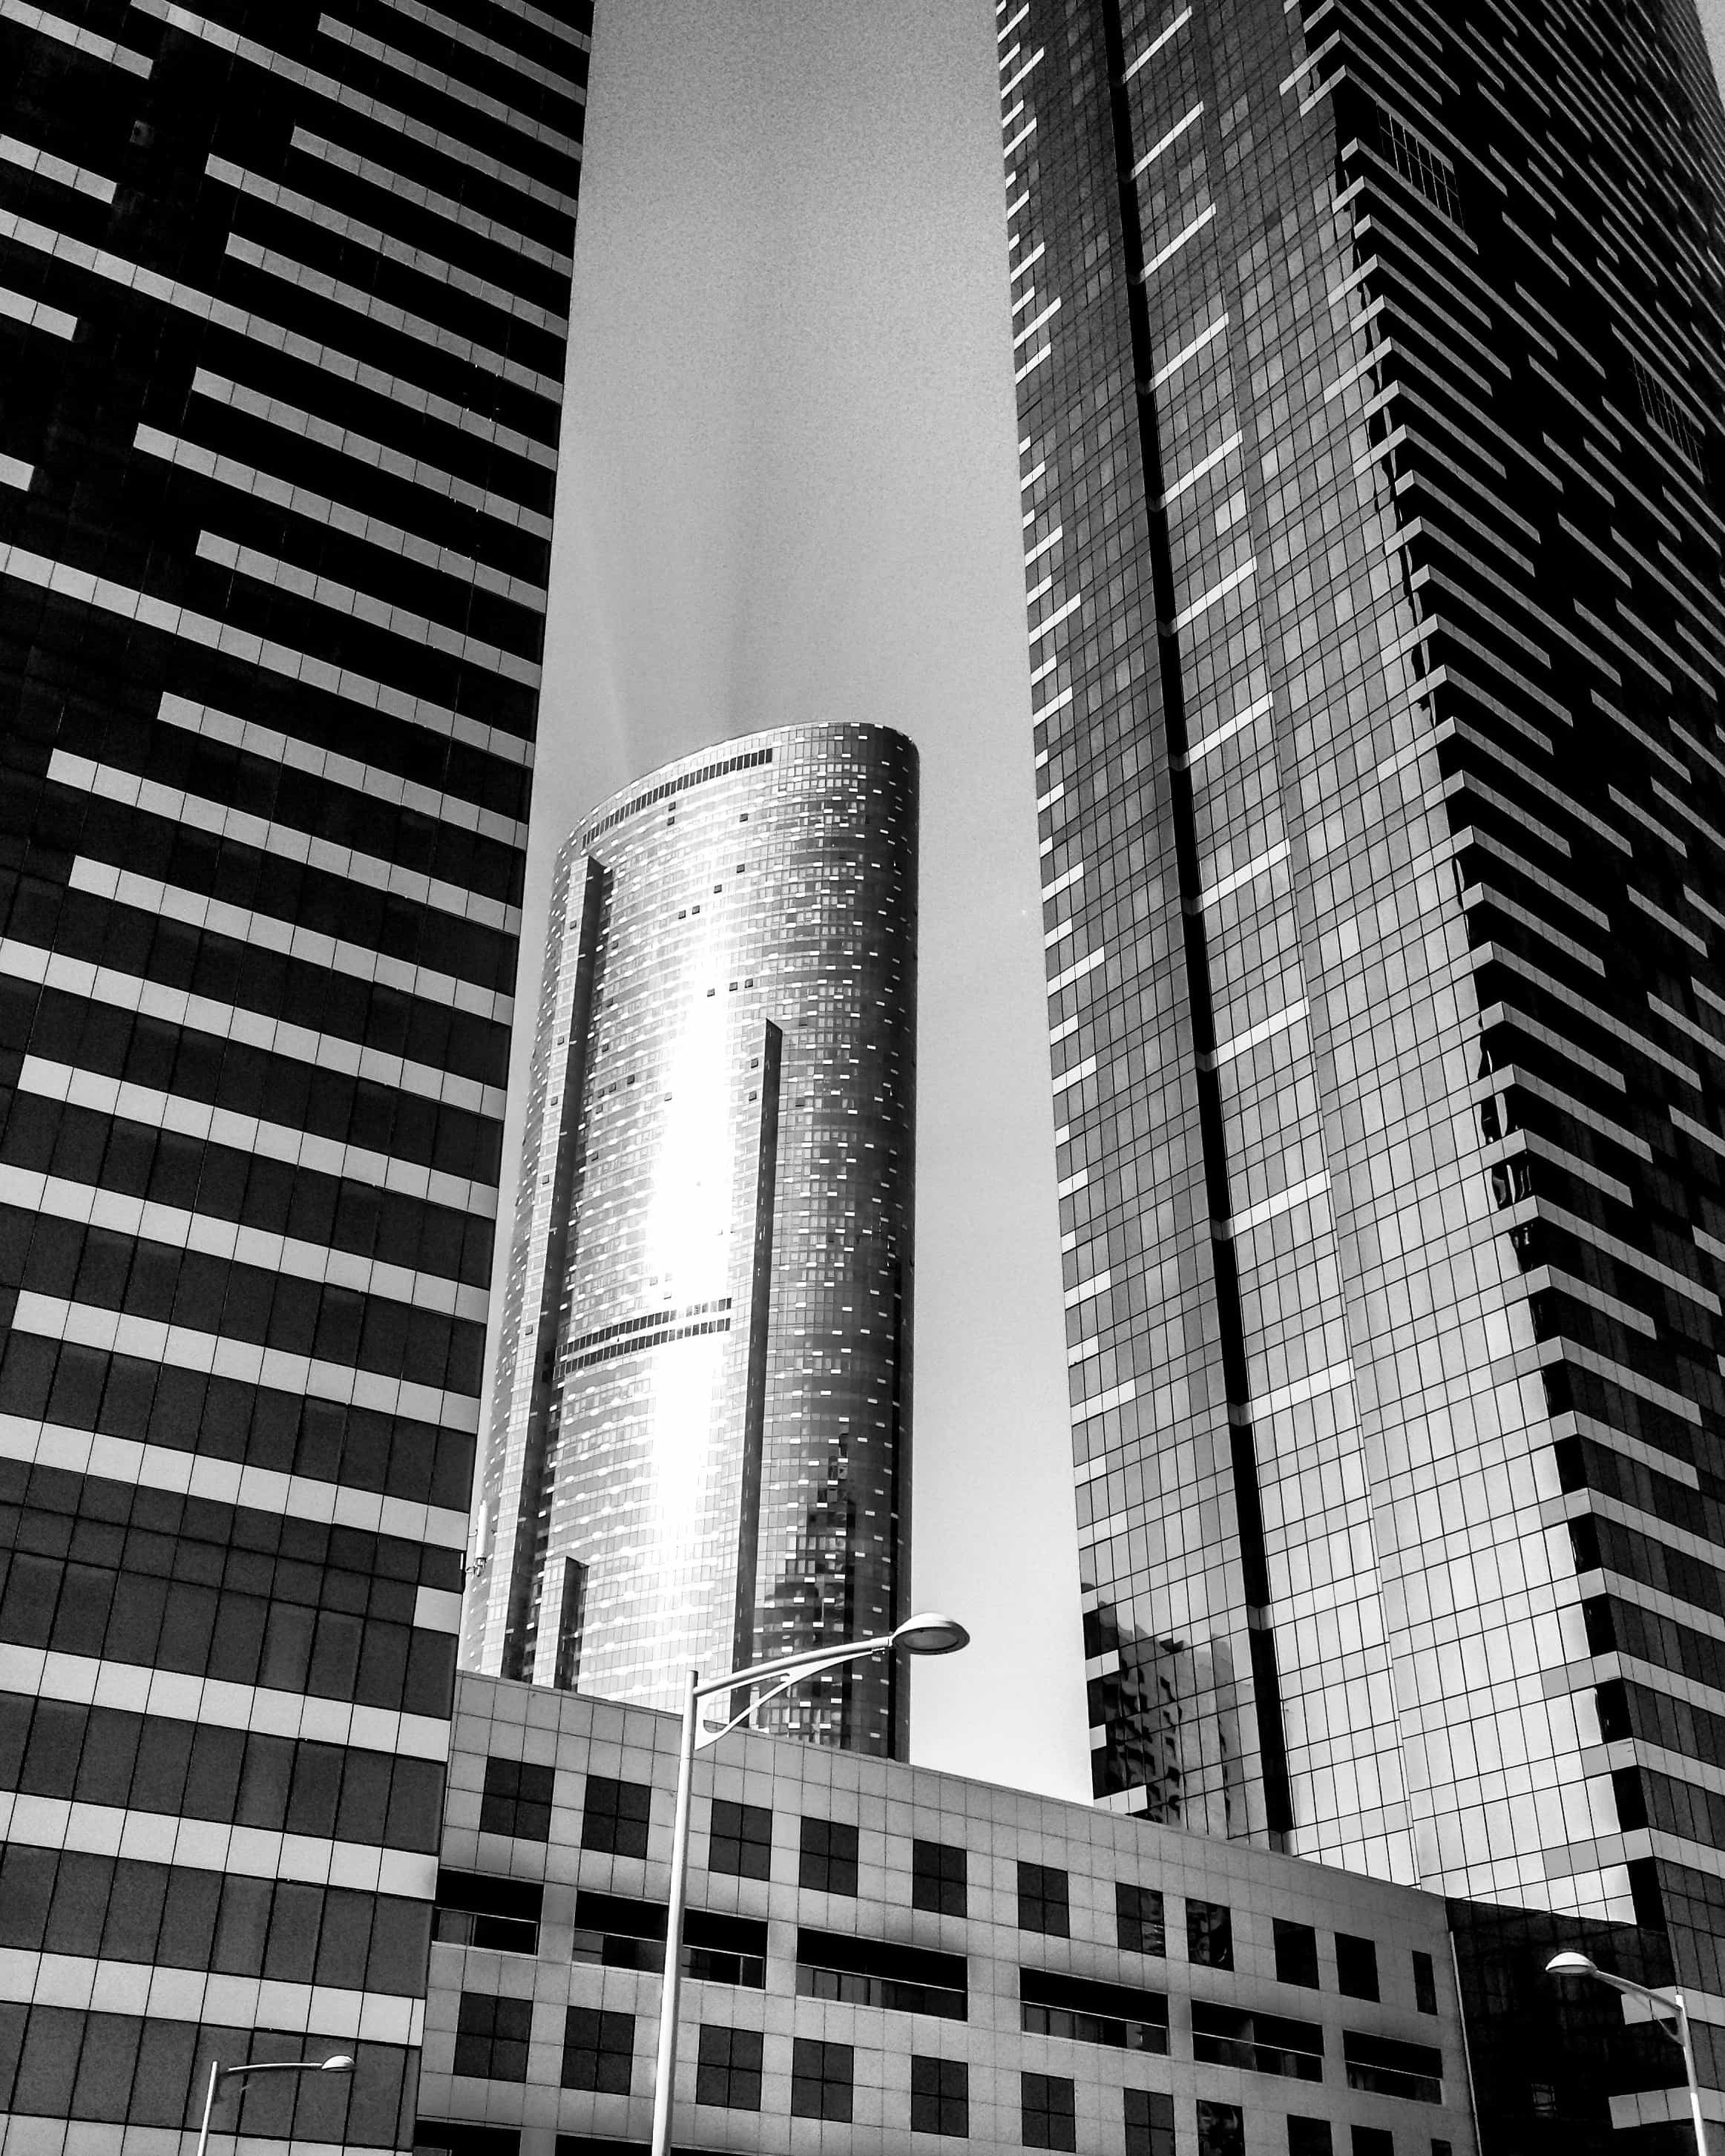 Free Picture Architecture City Downtown Monochrome Building Window Tower Urban Contemporary